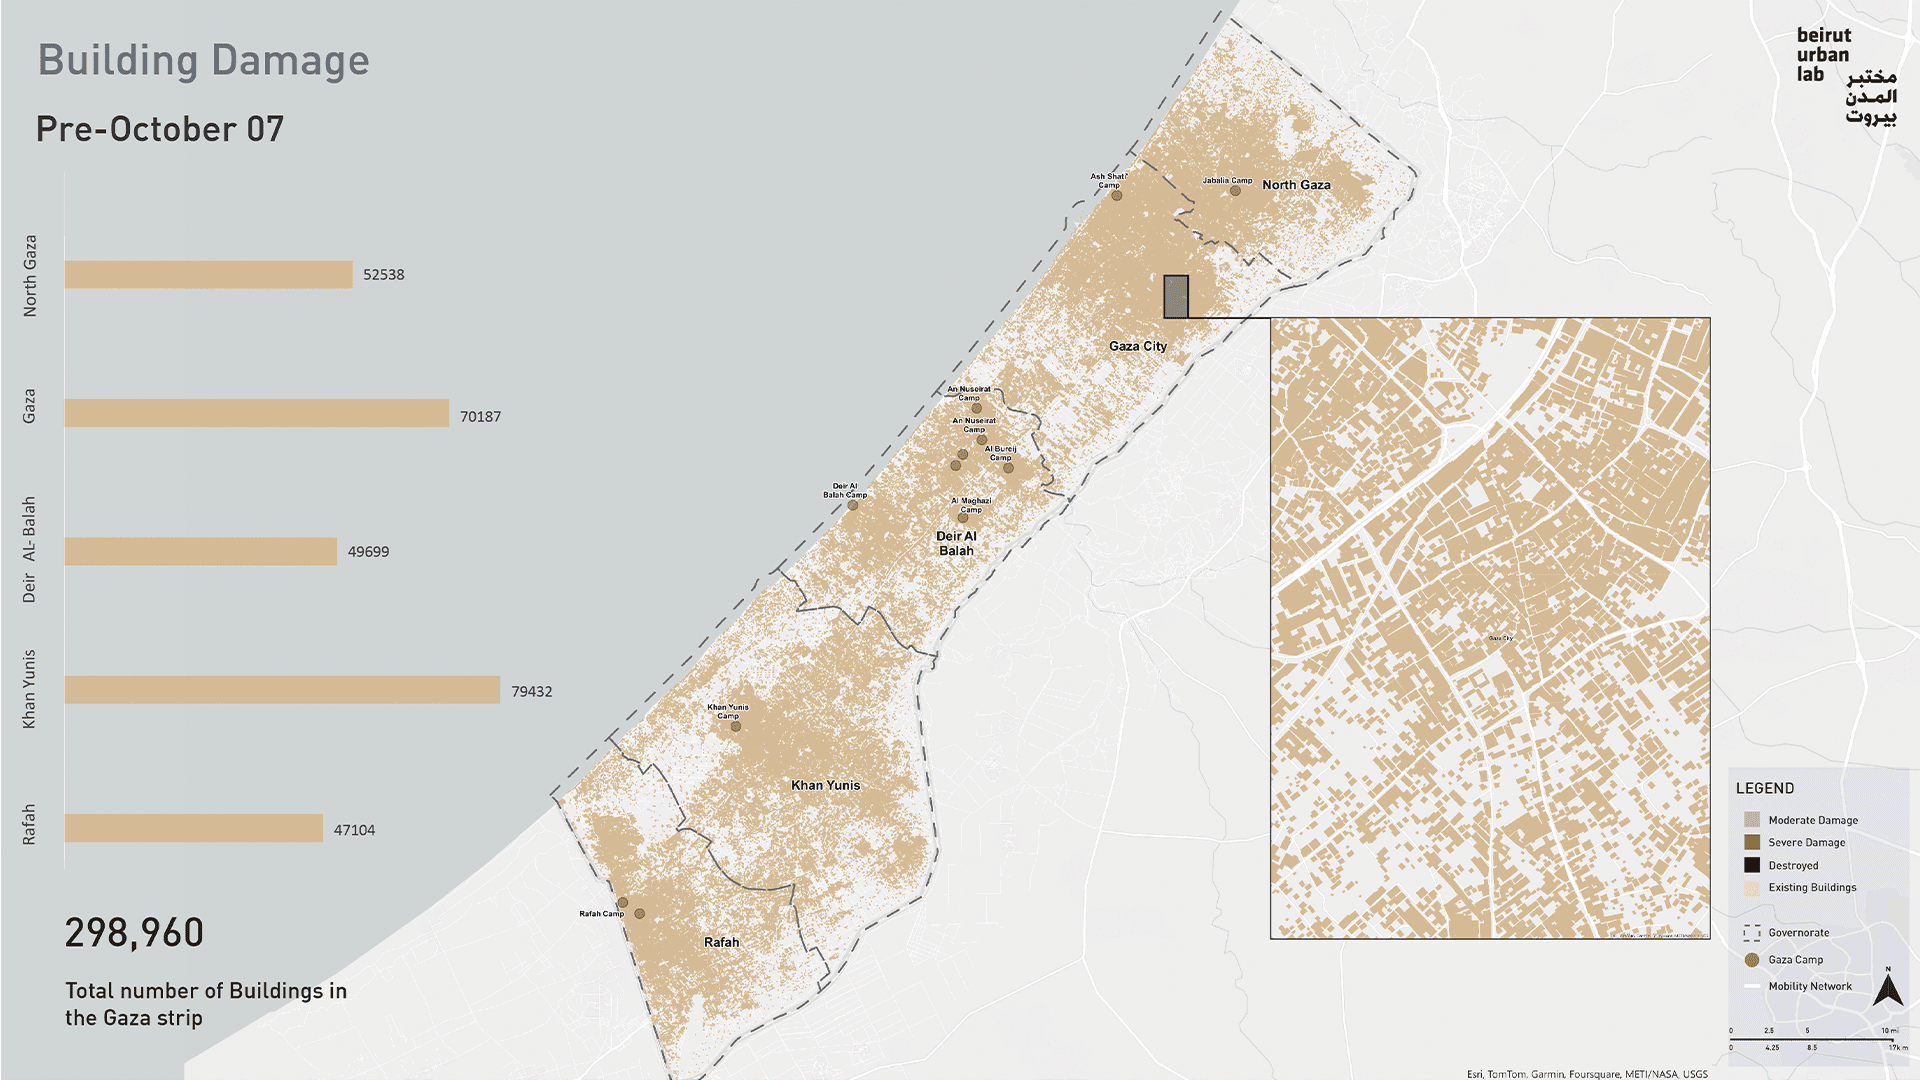 Damages to the buildings in Gaza. Source: Beirut Urban Lab based on data from UNOSAT